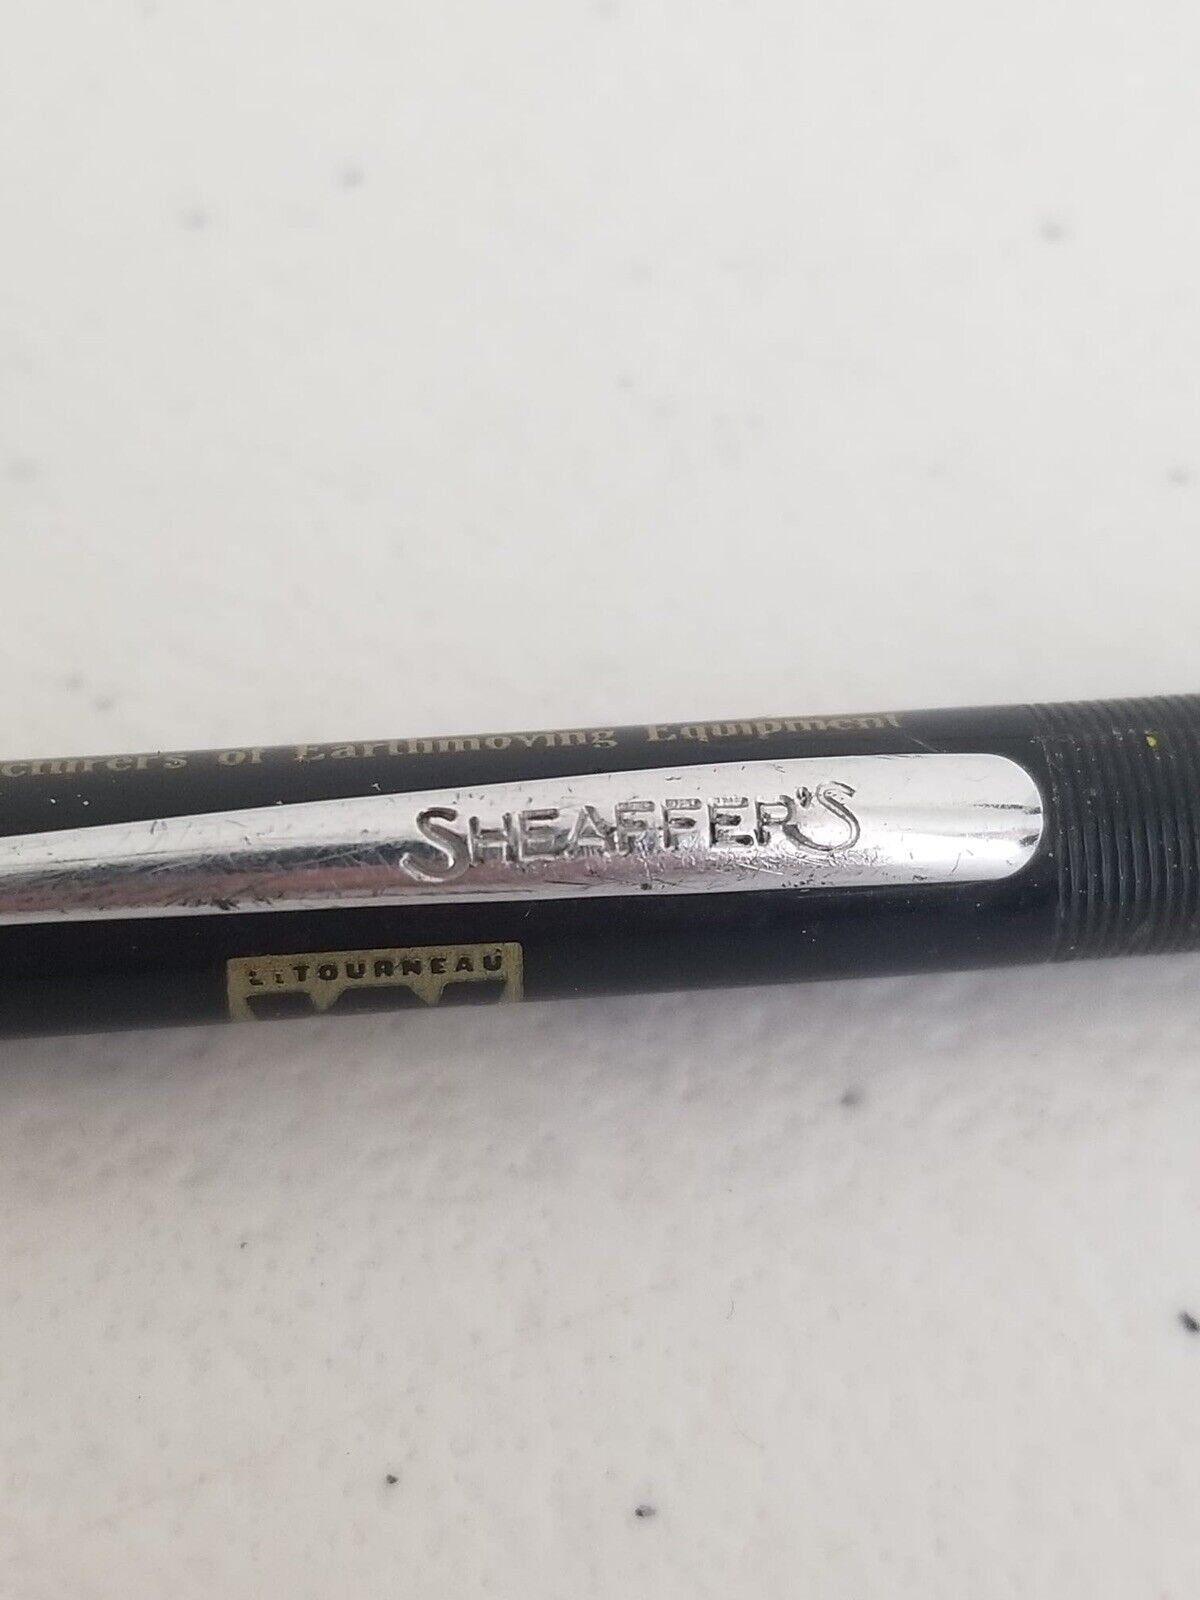 Vintage Sheaffer’s Mechanical Pencil with Advertising for LeTourneau-Westinghouse Company - Rare Collectible - TreasuTiques